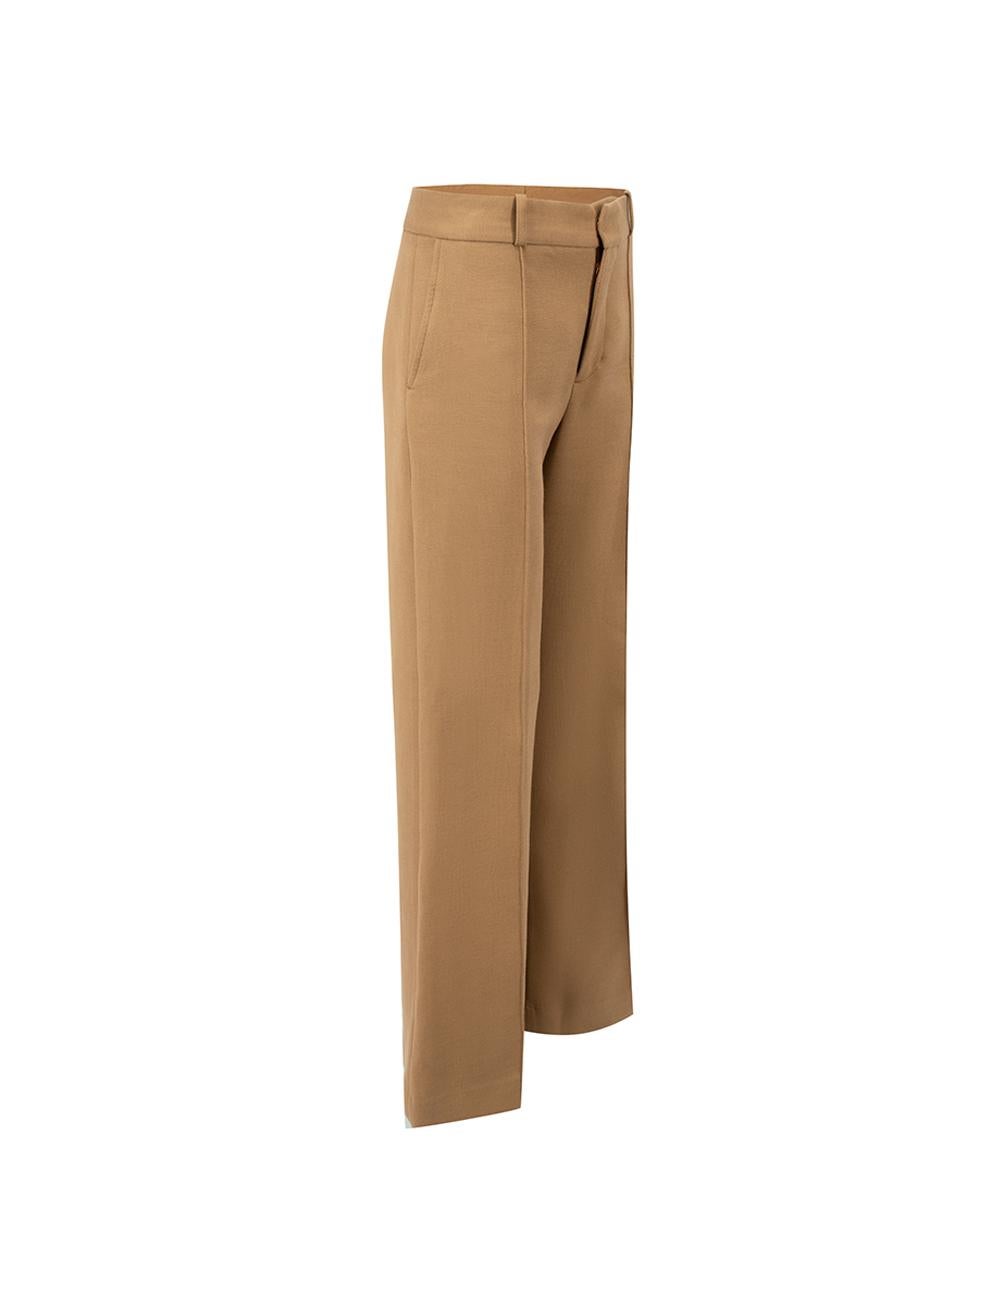 CONDITION is Very good. Hardly any visible wear to trousers is evident on this used See by Chloé designer resale item. 



Details


Brown

Cotton

Wide leg trousers

High rise

Front zip closure with button

Belt hoops

Front side pockets





Made